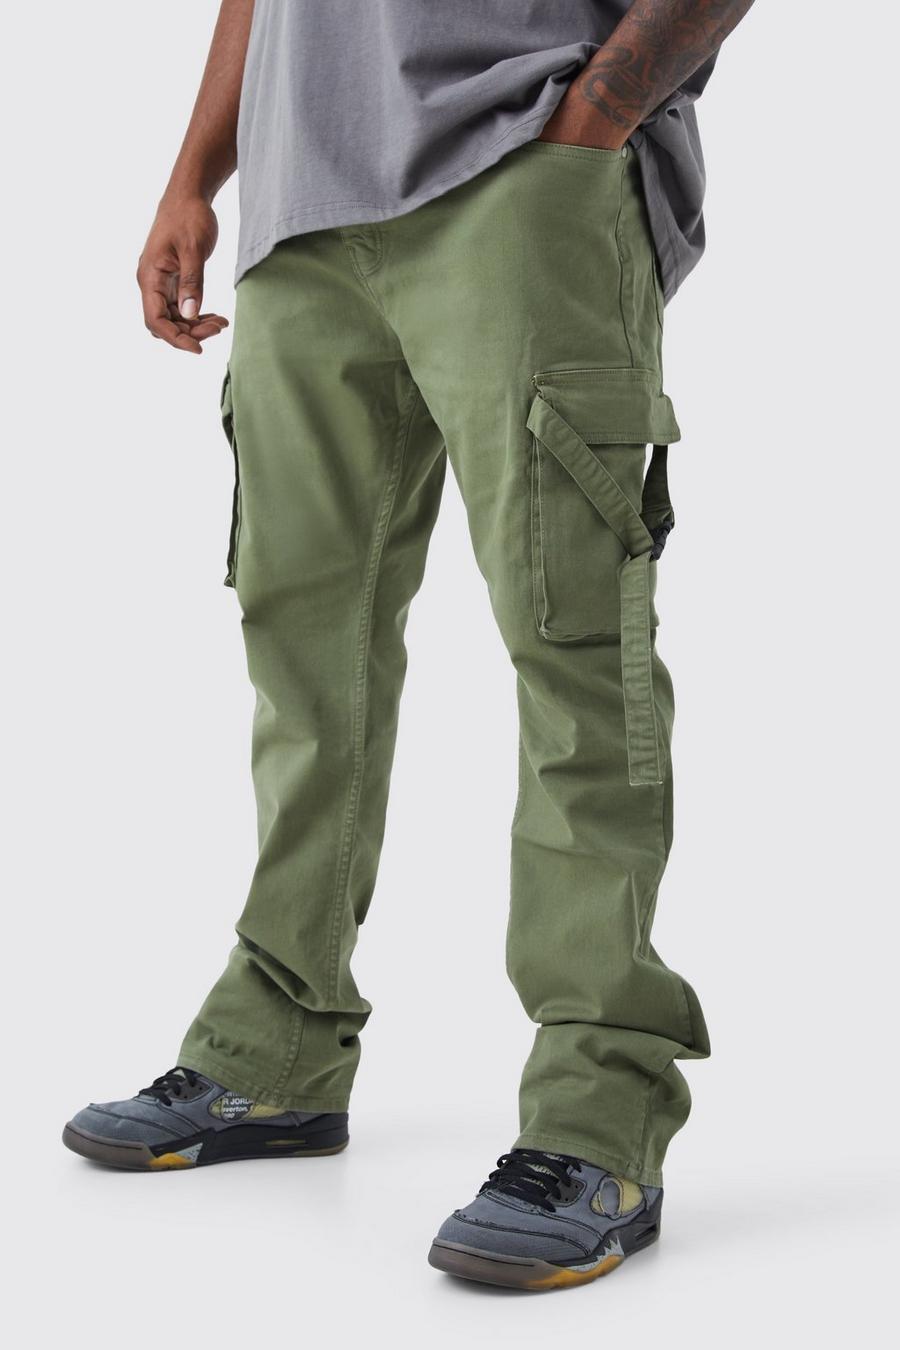 Olive gerde Plus Fixed Waist Slim Stacked Flare Strap Cargo Trouser